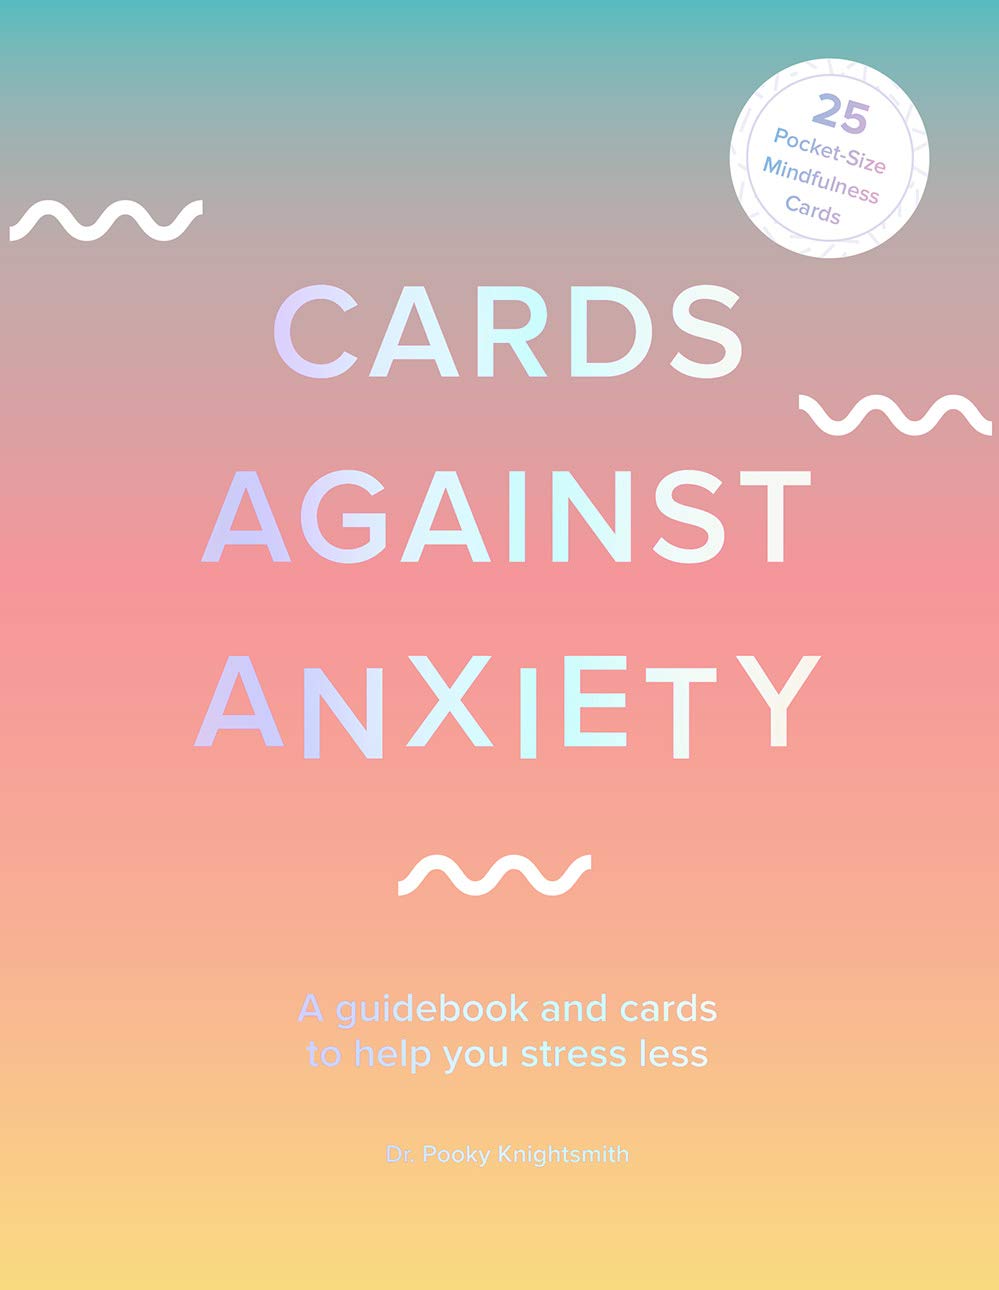 Cards Against Anxiety || Pooky Knightsmith